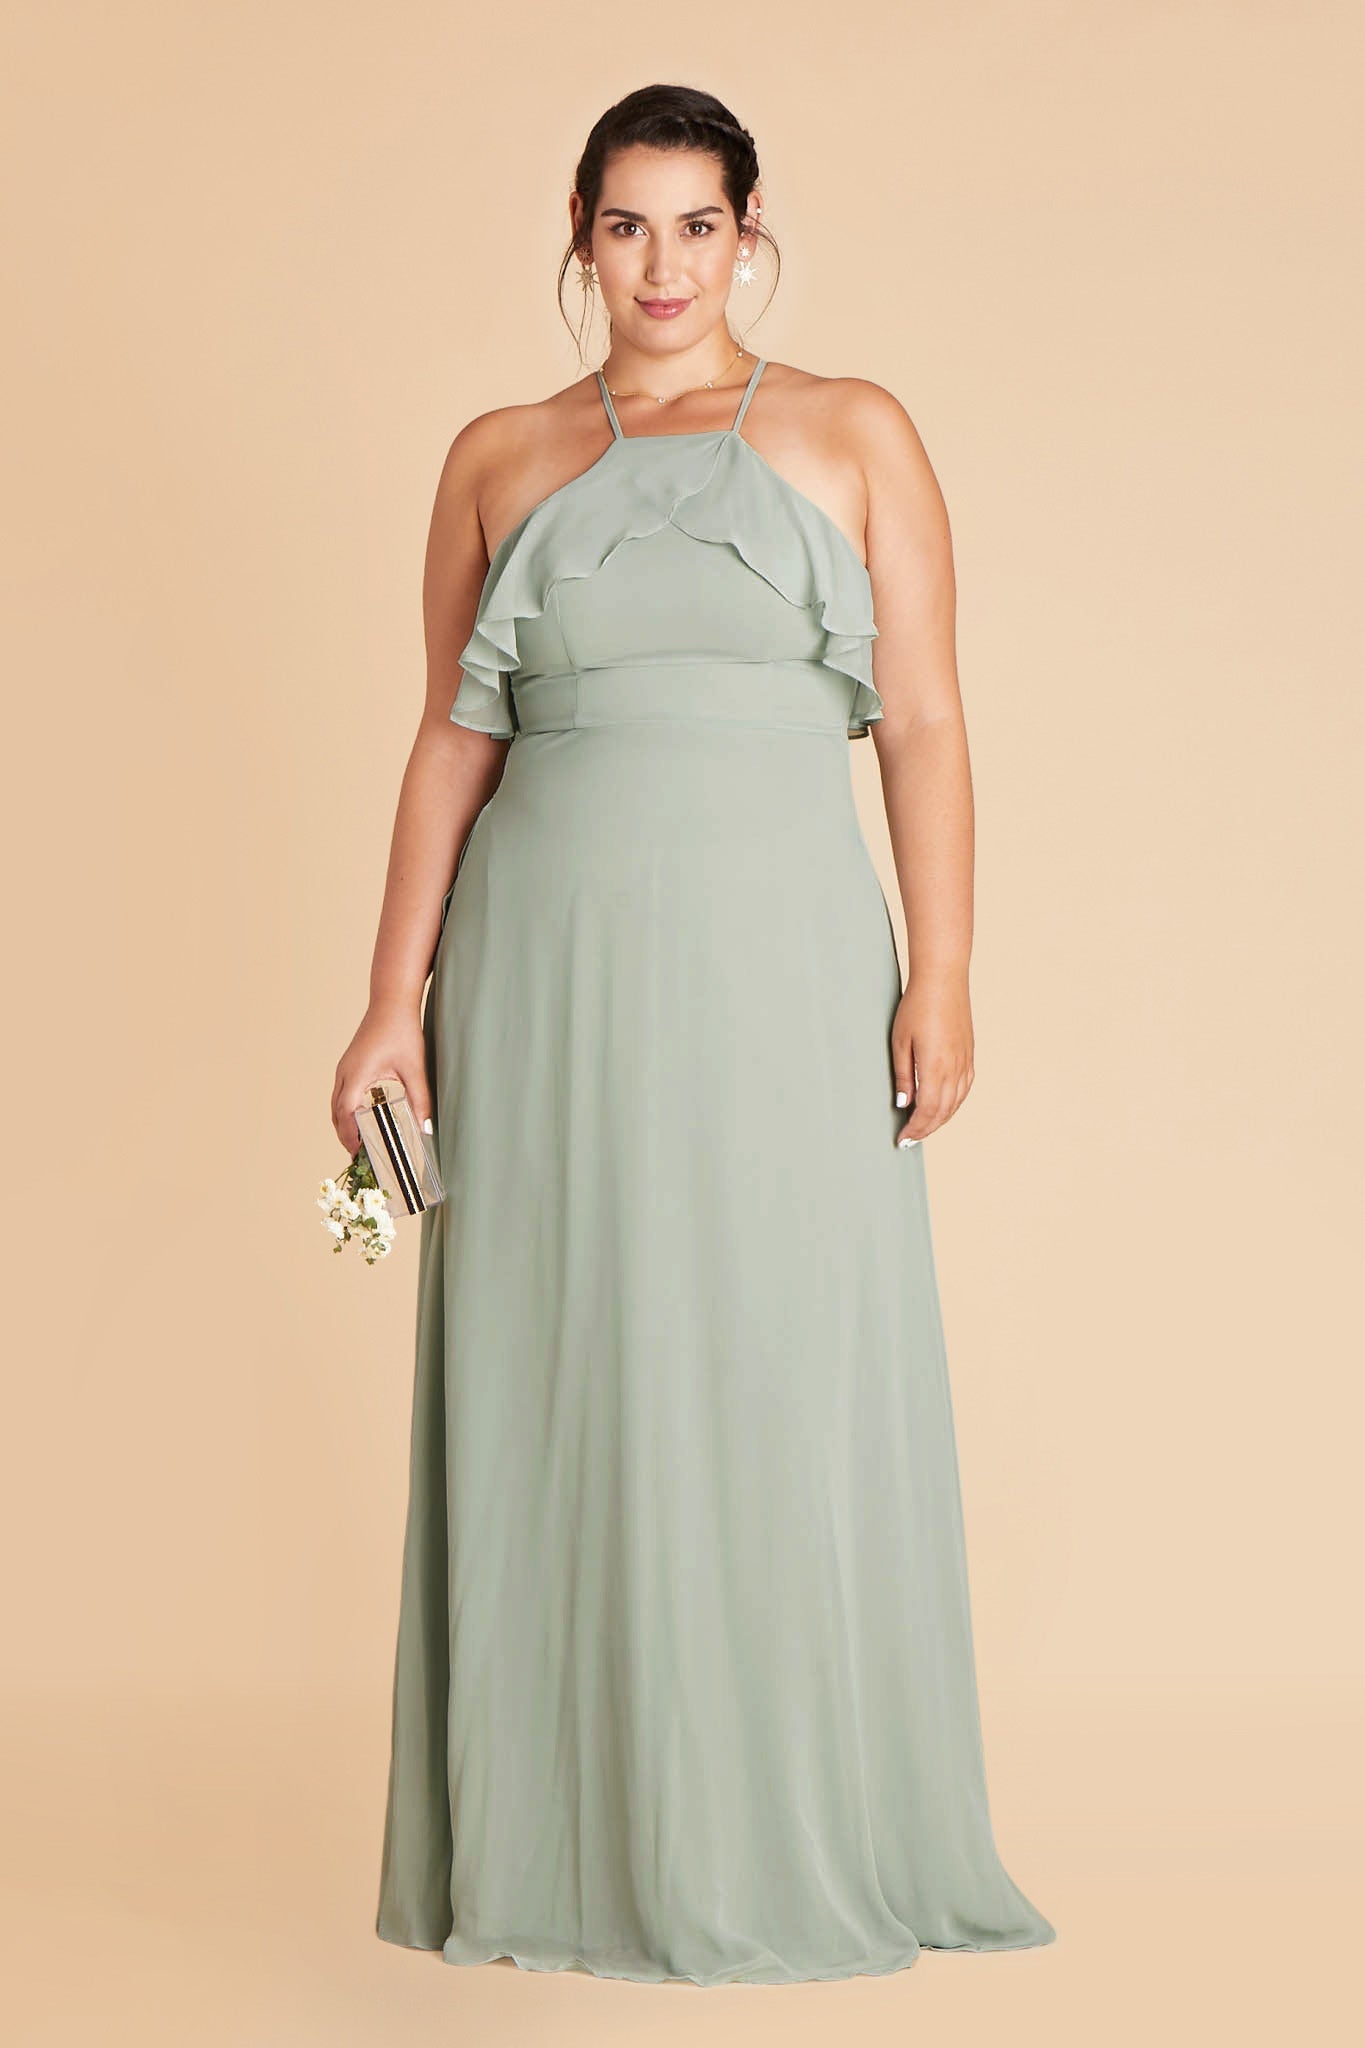 Jules plus size bridesmaid dress in sage green chiffon by Birdy Grey, front view